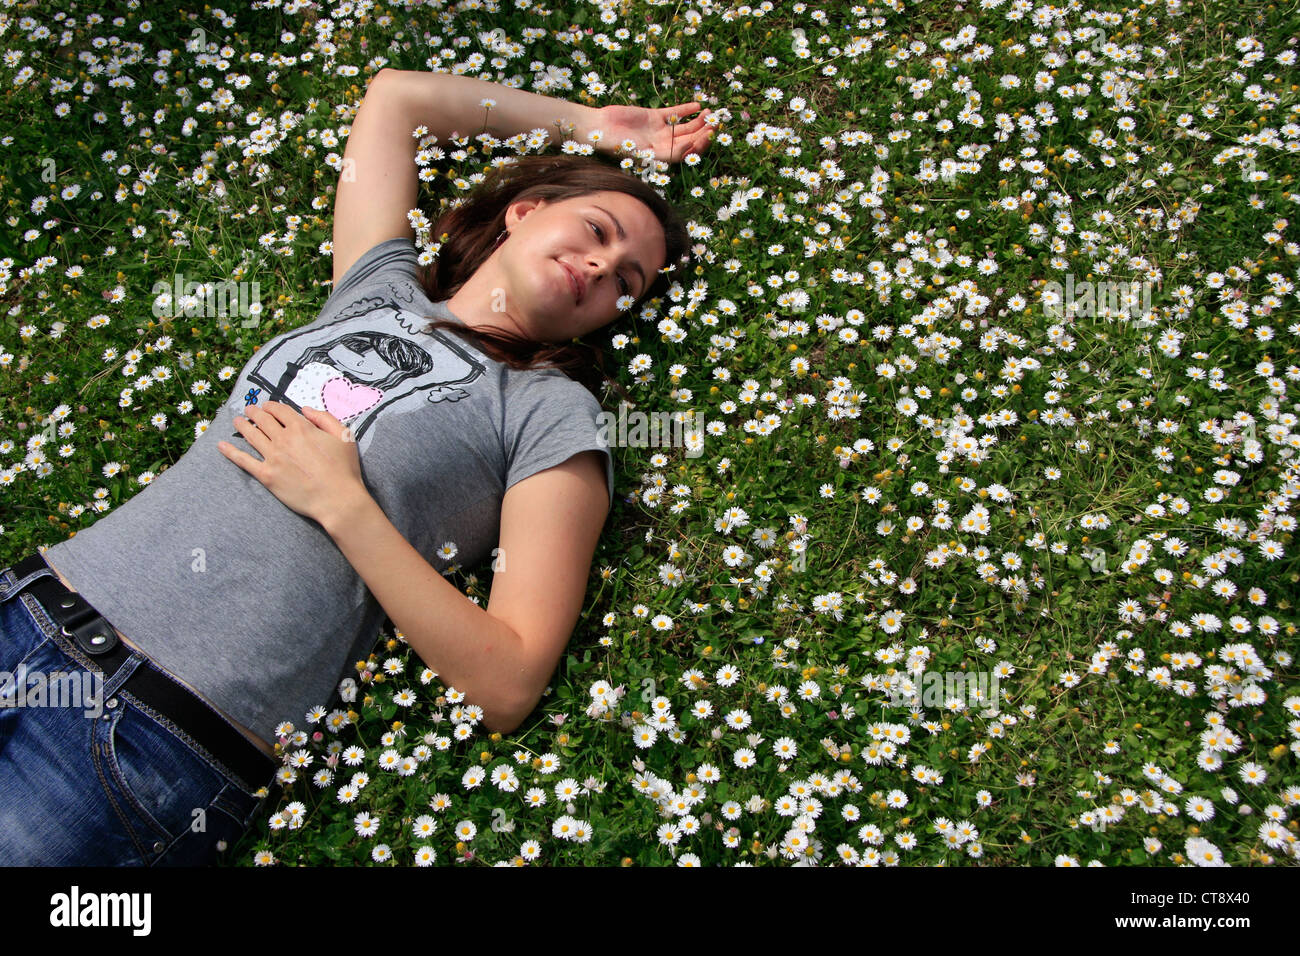 Young woman laying in flowers Stock Photo